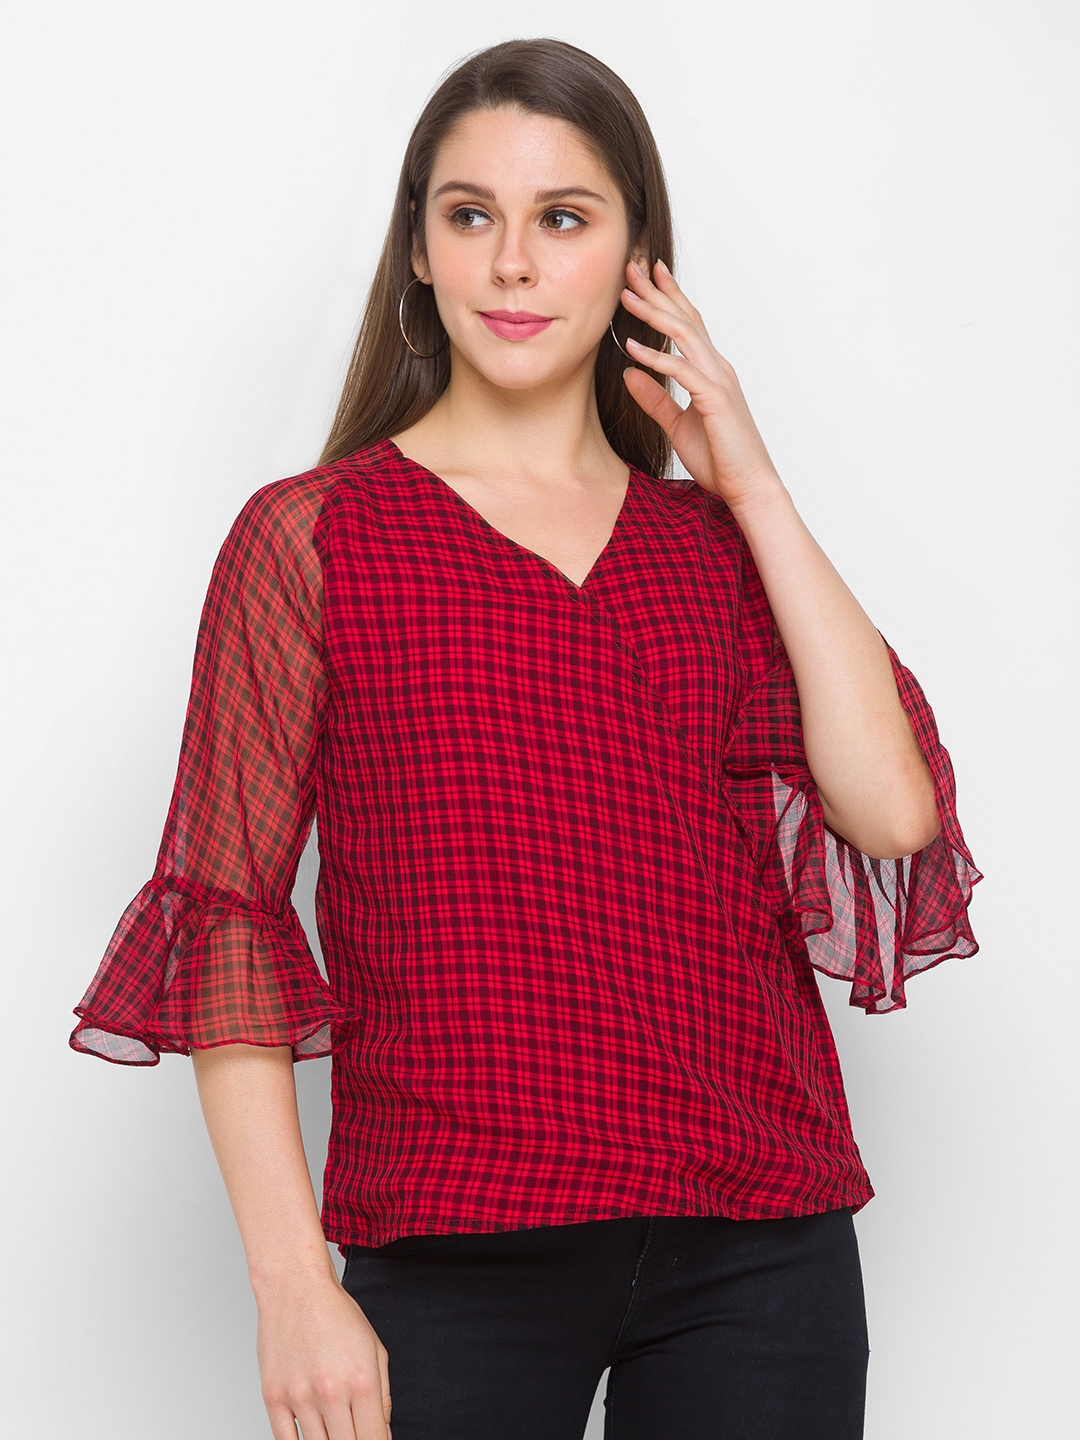 globus | Globus Red Checked Top